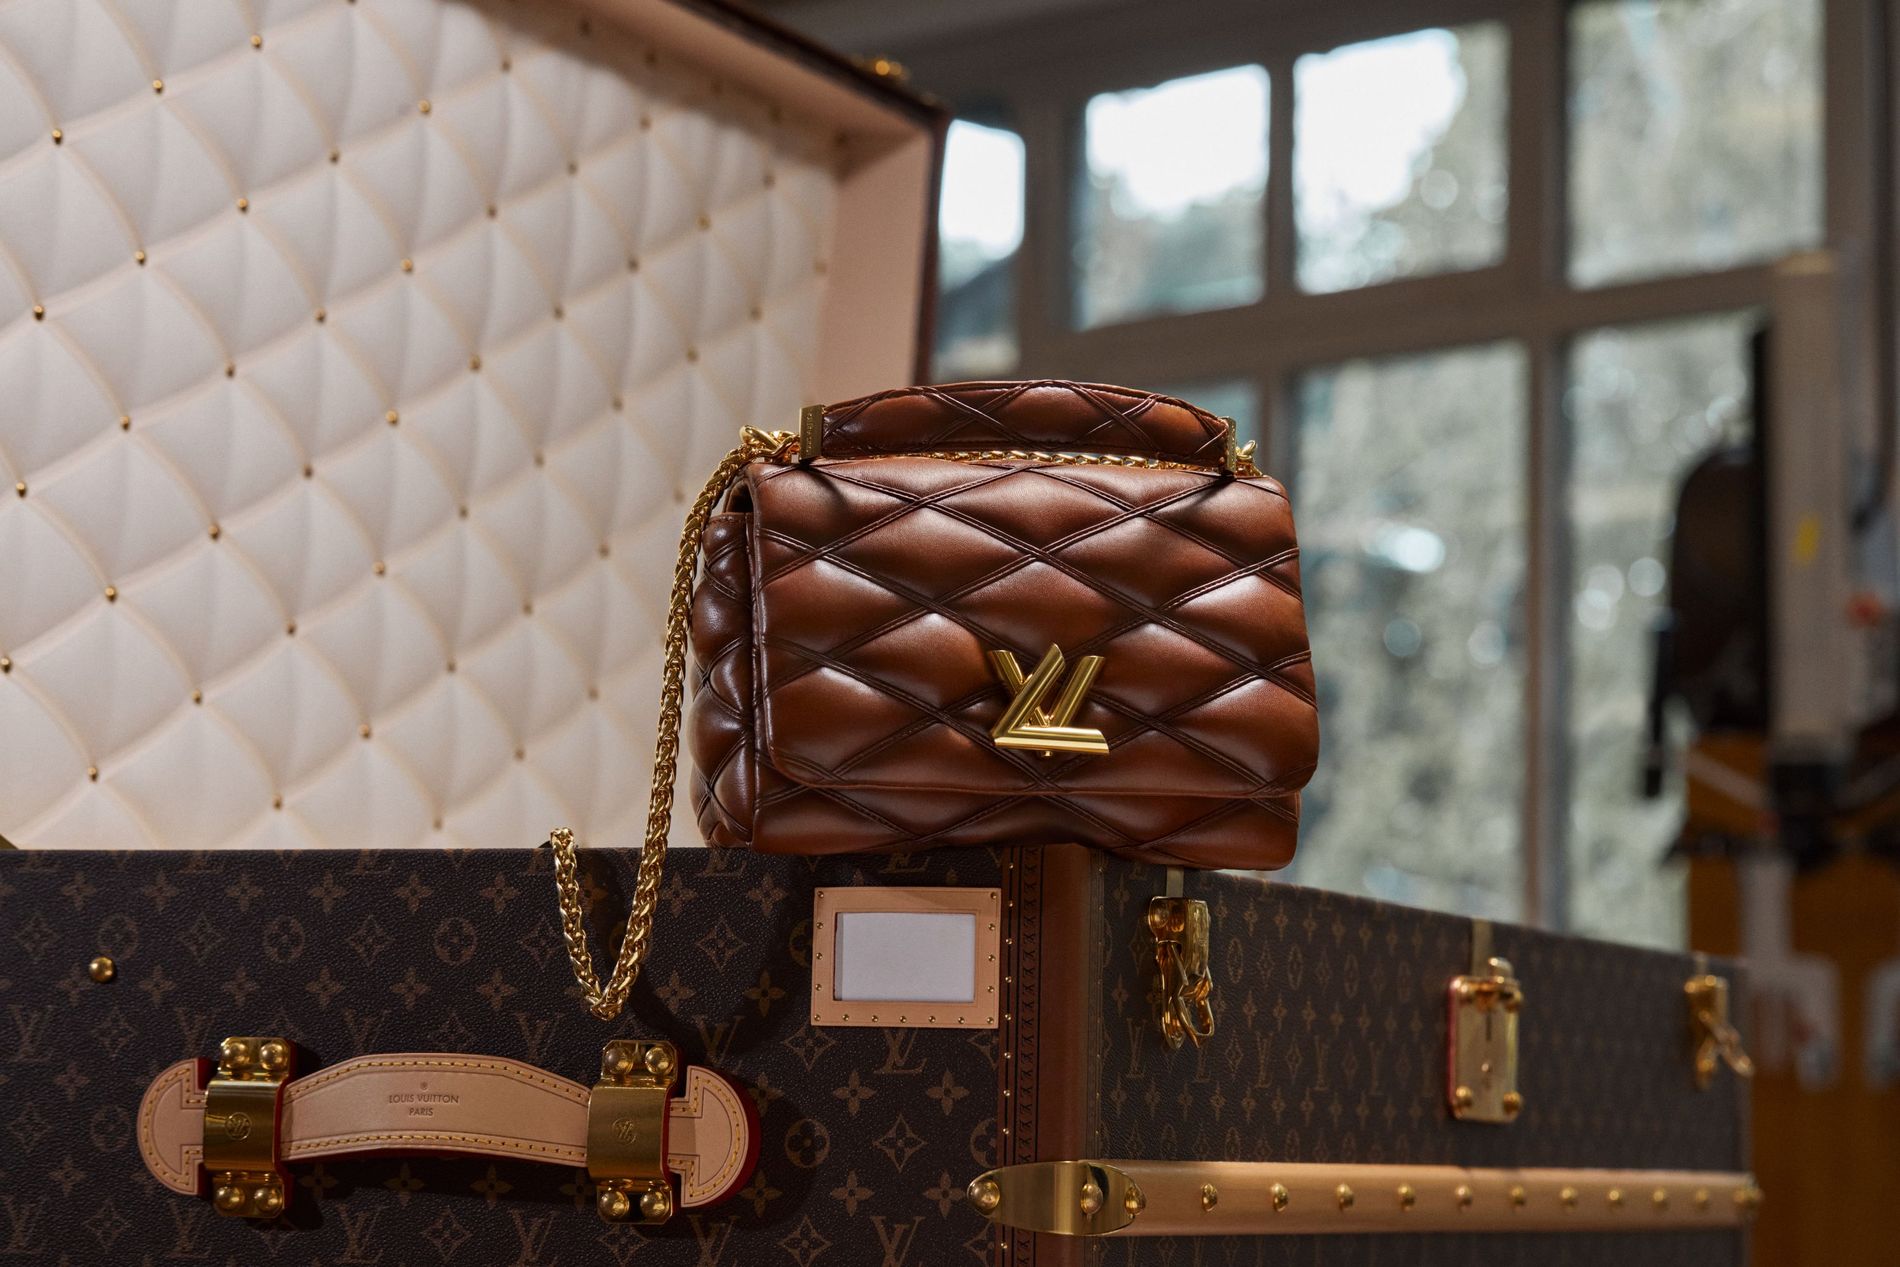 August Fashion News: Louis Vuitton's GO-14 is the trunk-inspired